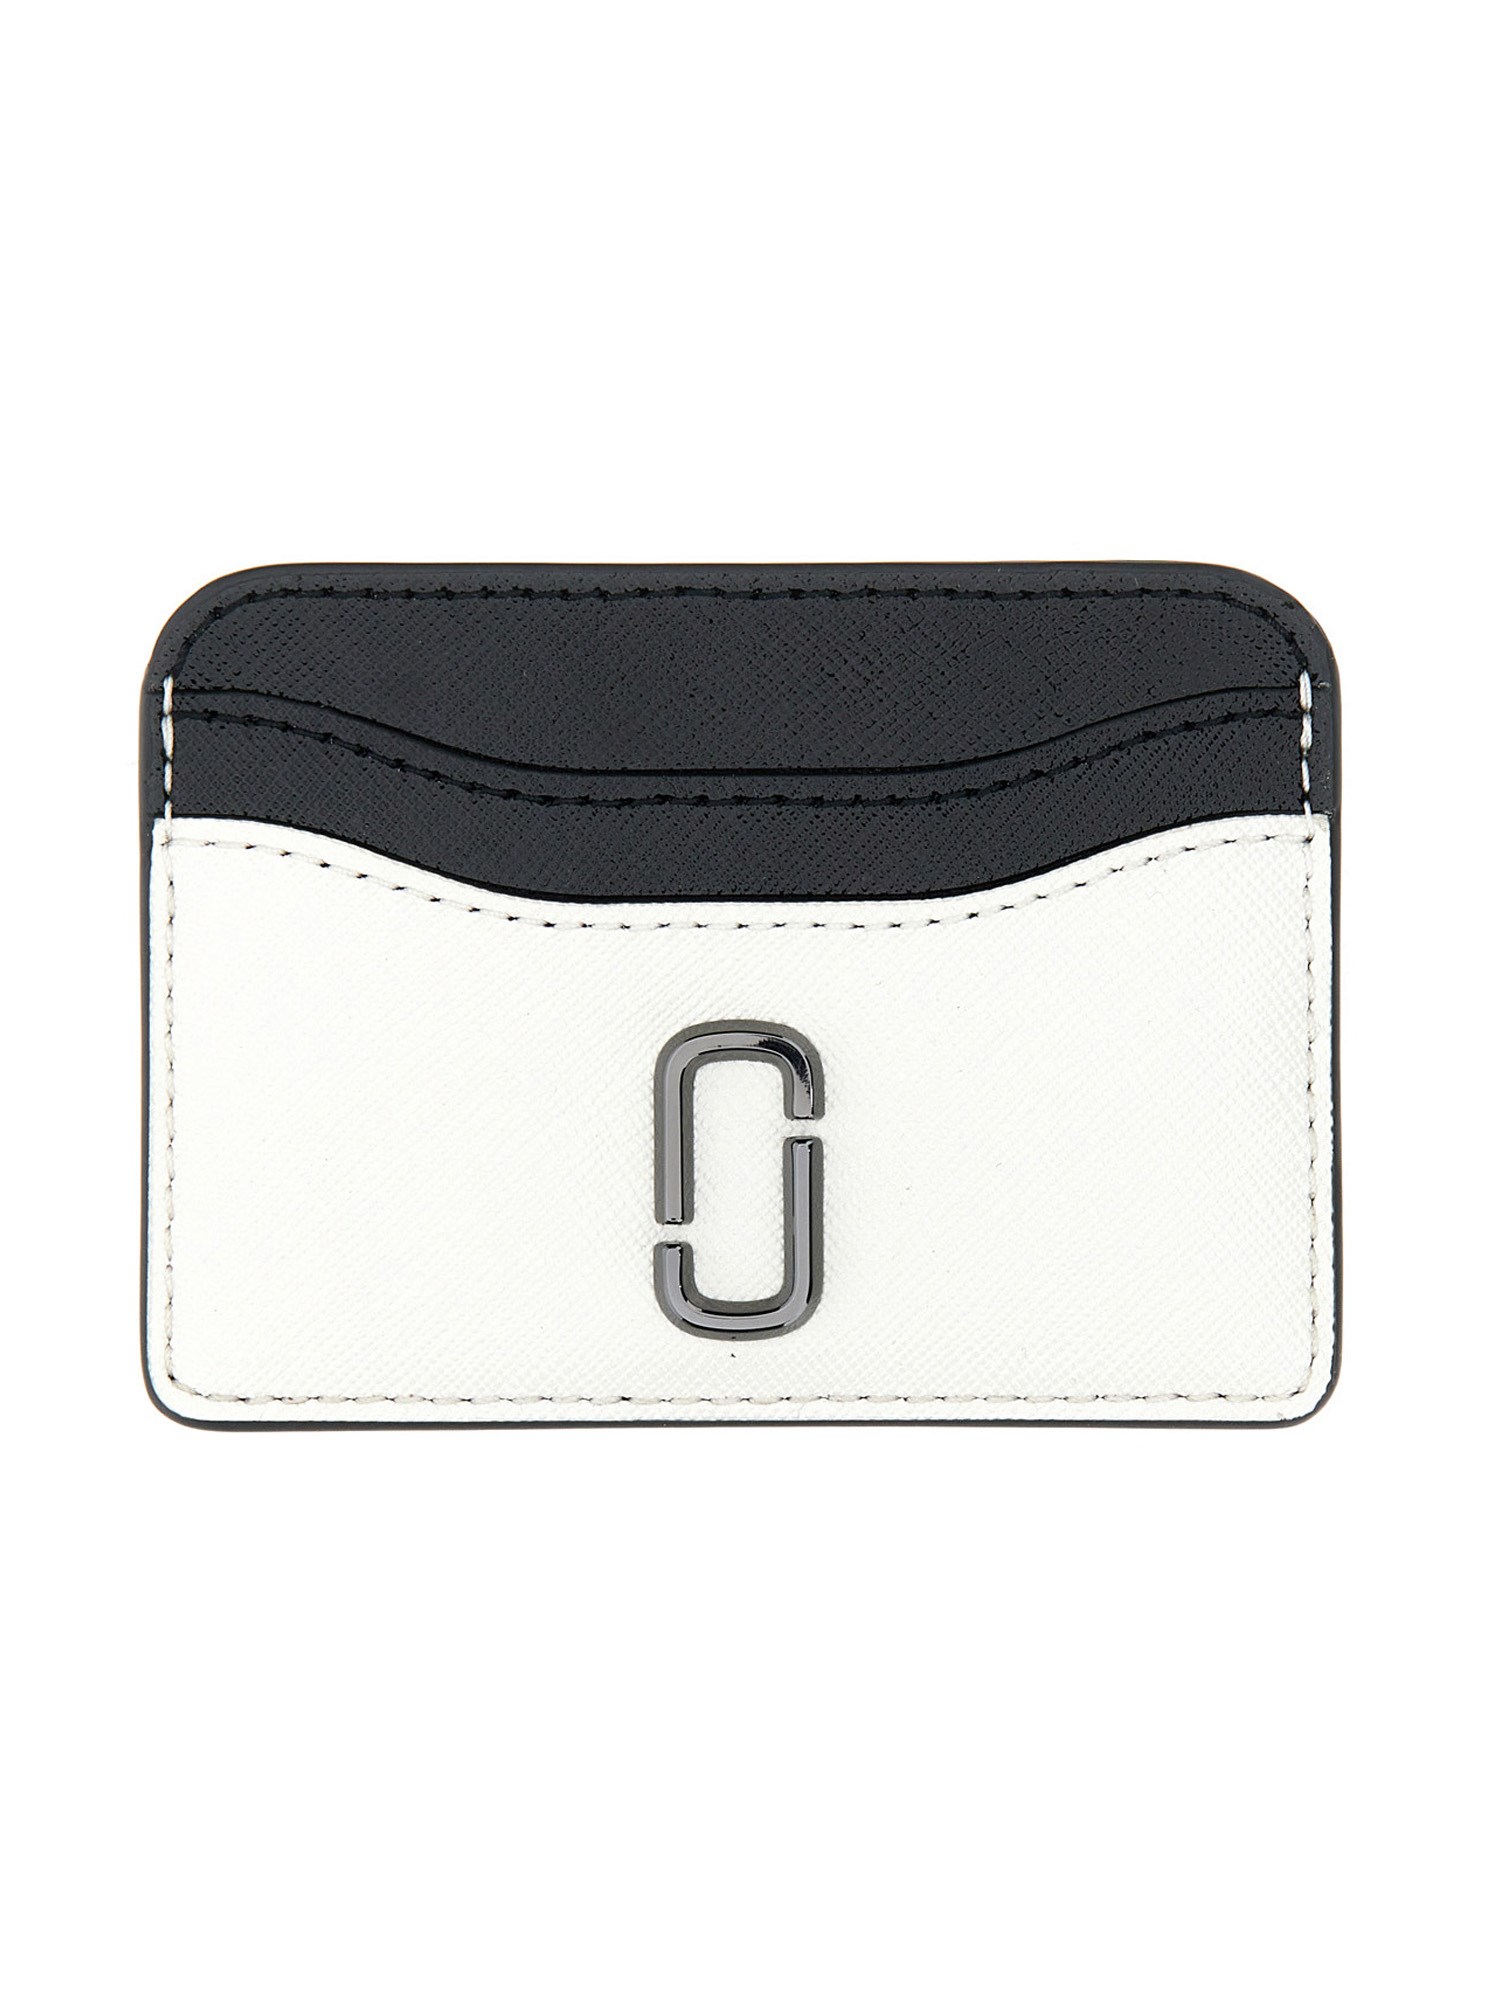 marc jacobs card holder with logo